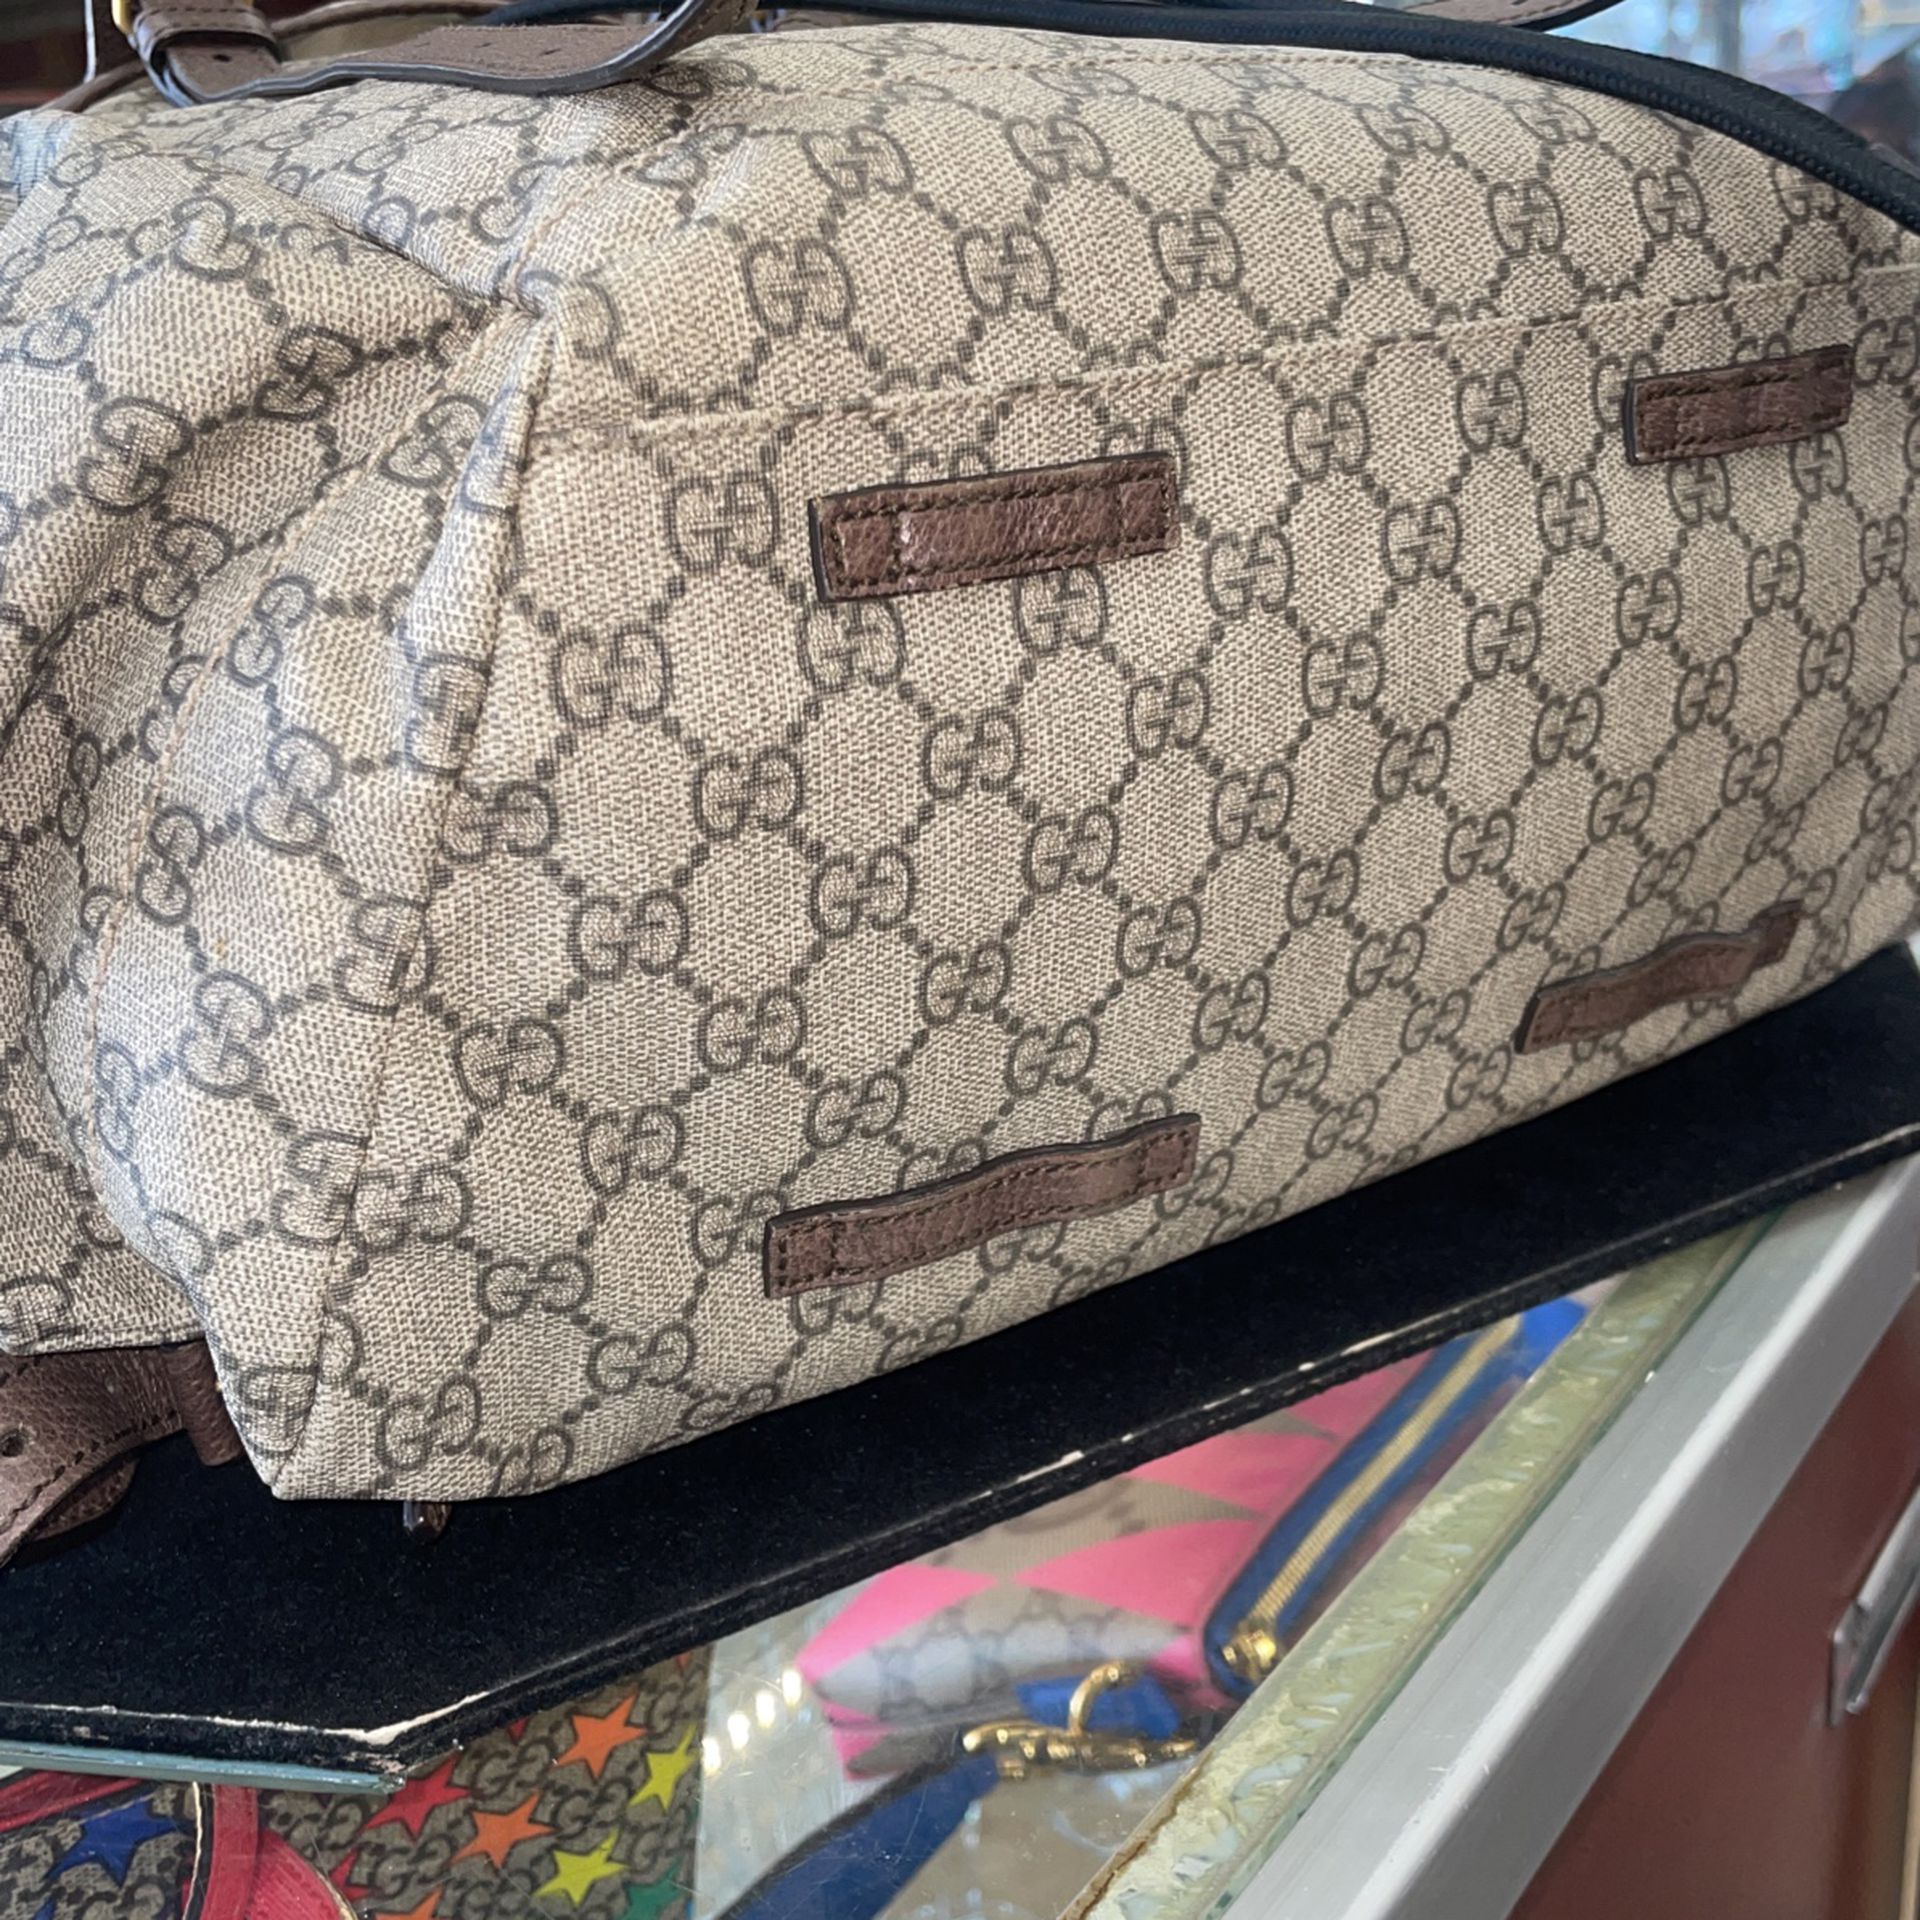 Gucci Backpack for Sale in Houston, TX - OfferUp